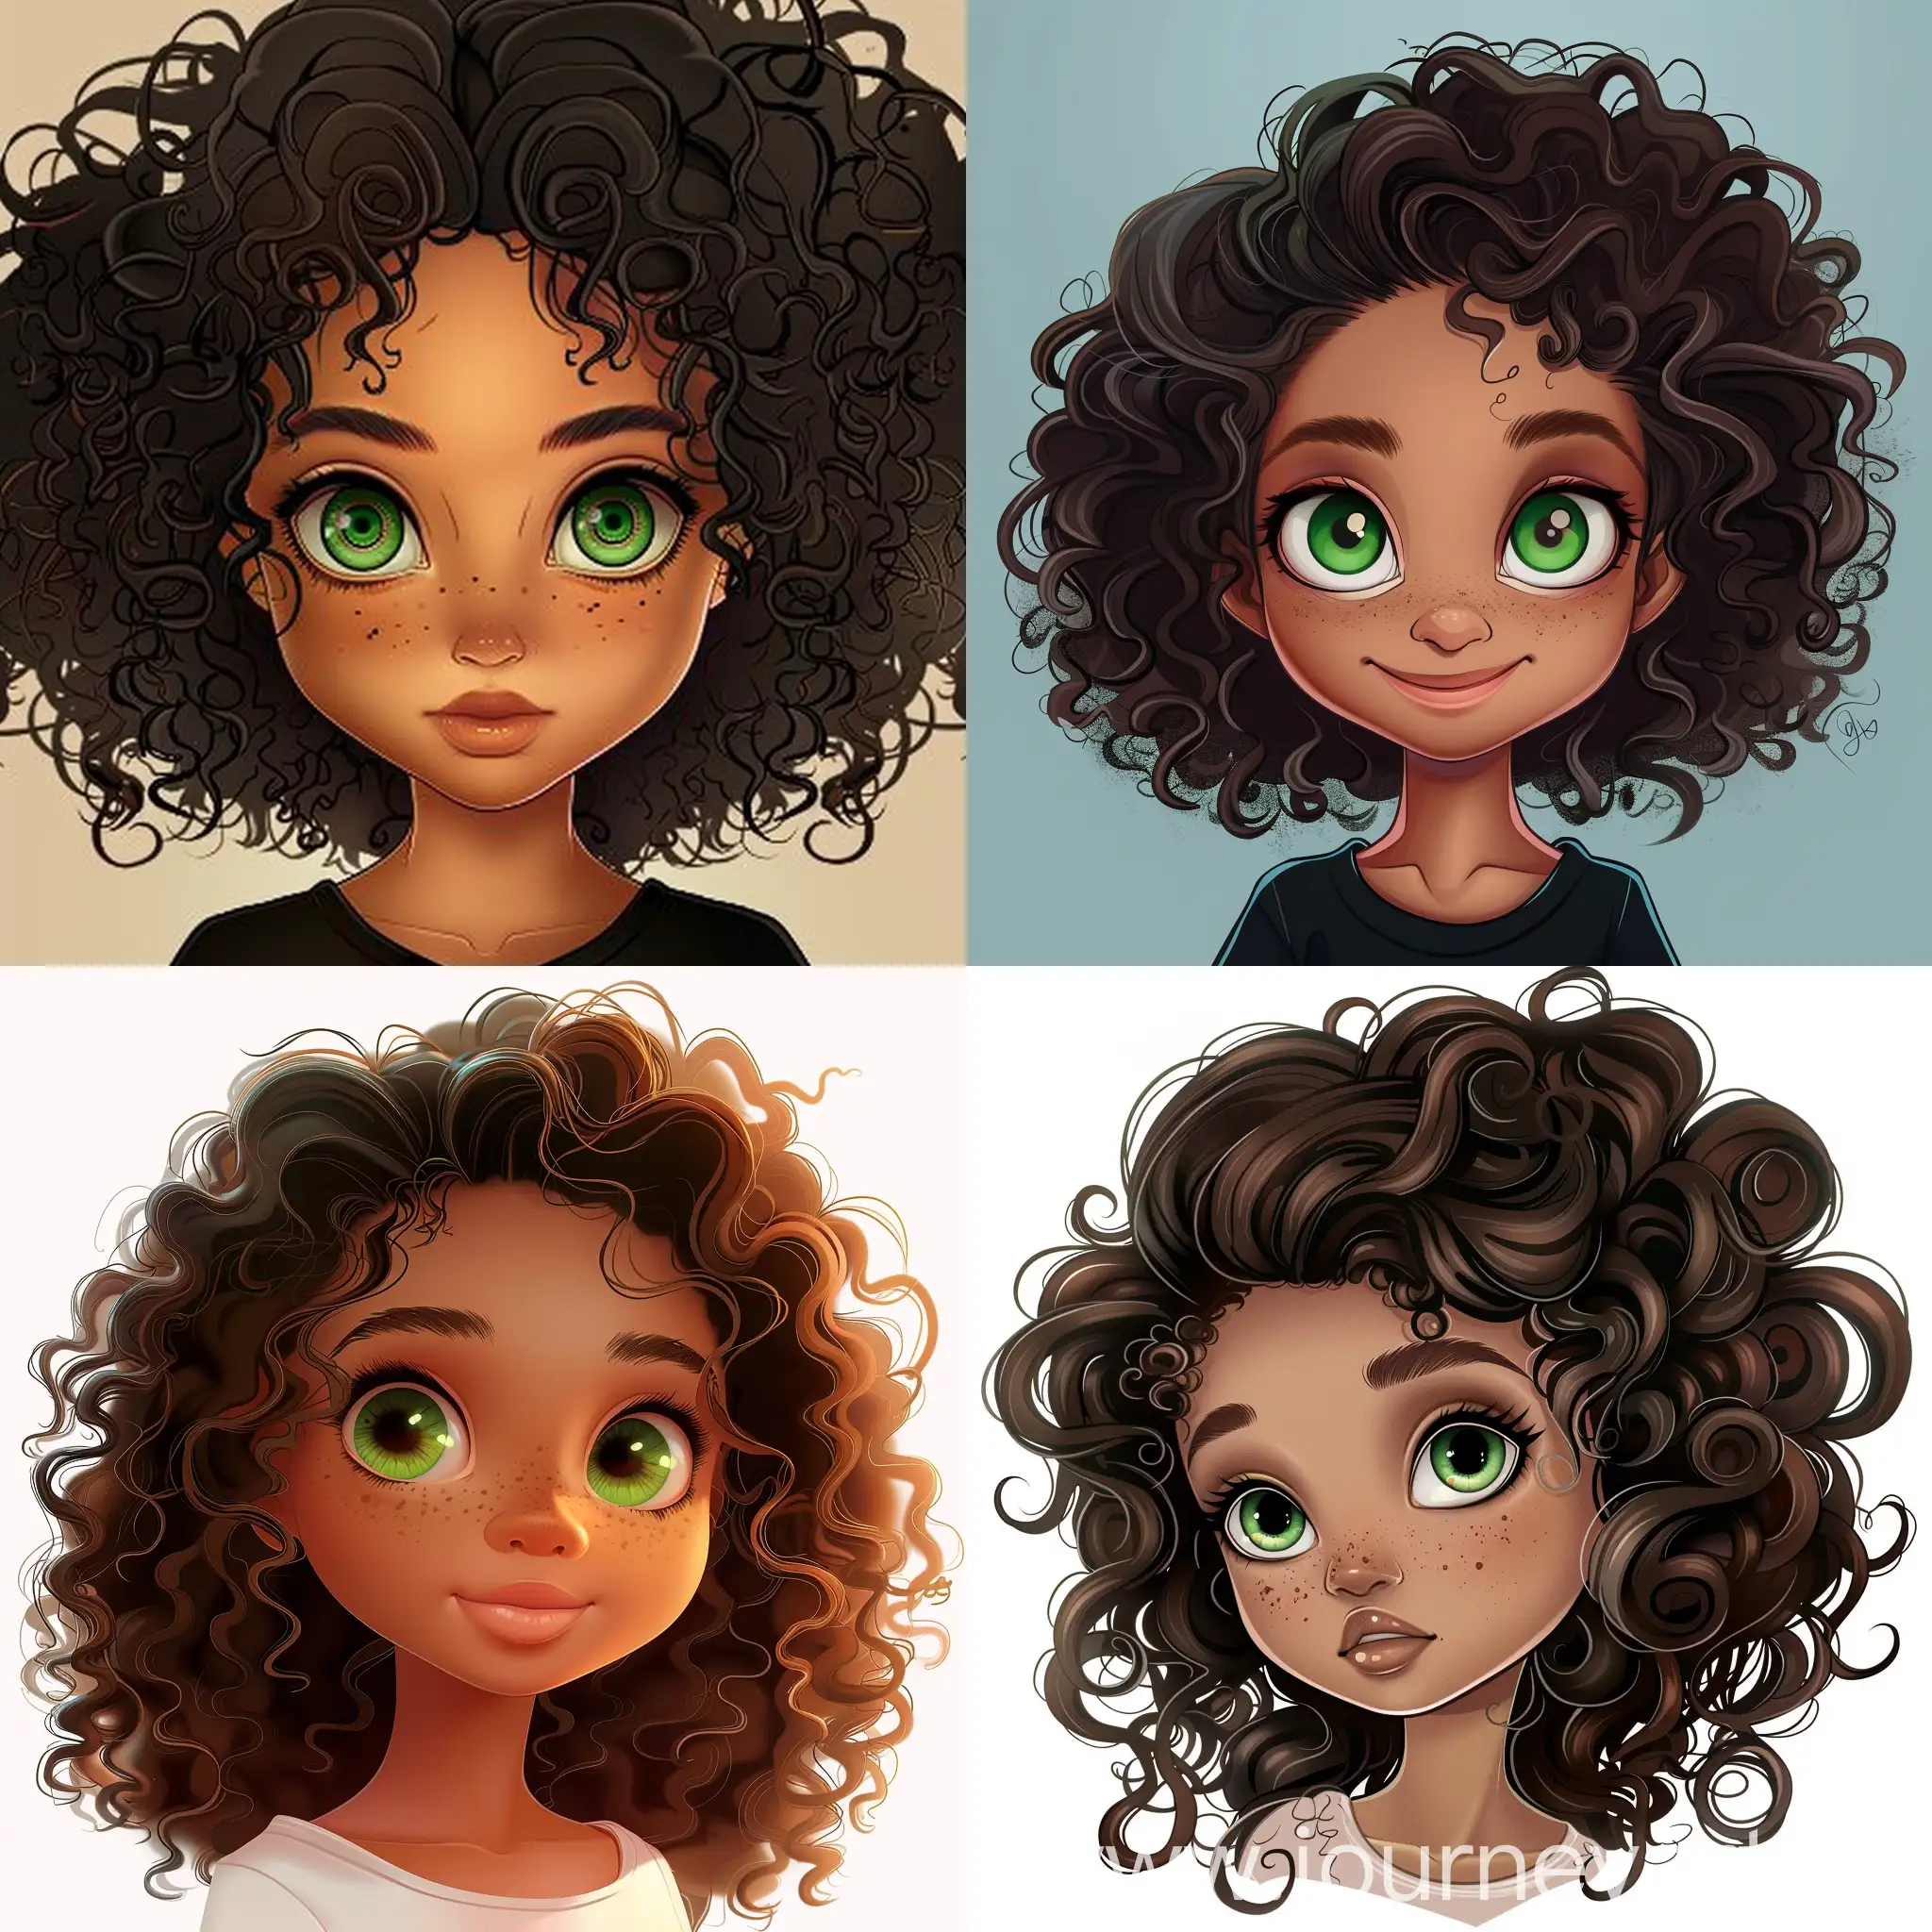 Biracial-Cartoon-Girl-with-Curly-Hair-and-Green-Eyes